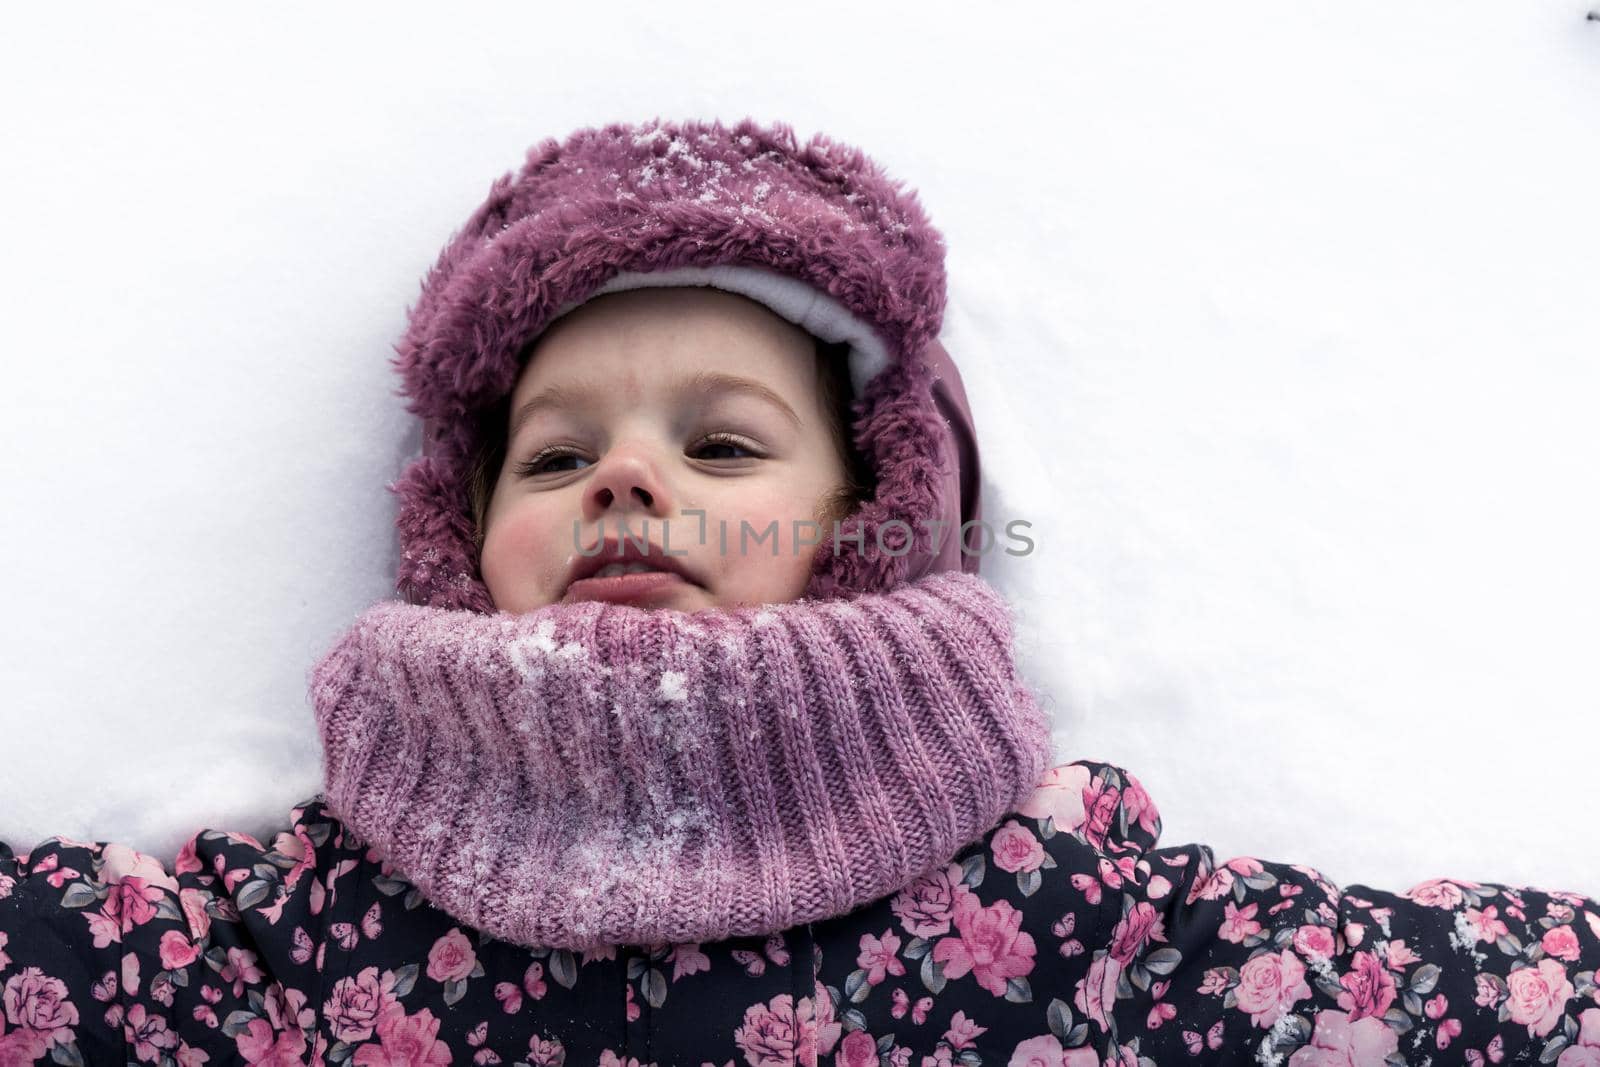 Winter, family, childhood concepts - close-up portrait authentic little preschool minor girl in pink clothes smile laugh closing eyes laying on snow in frosty weather day outdoors. Funny kid face.